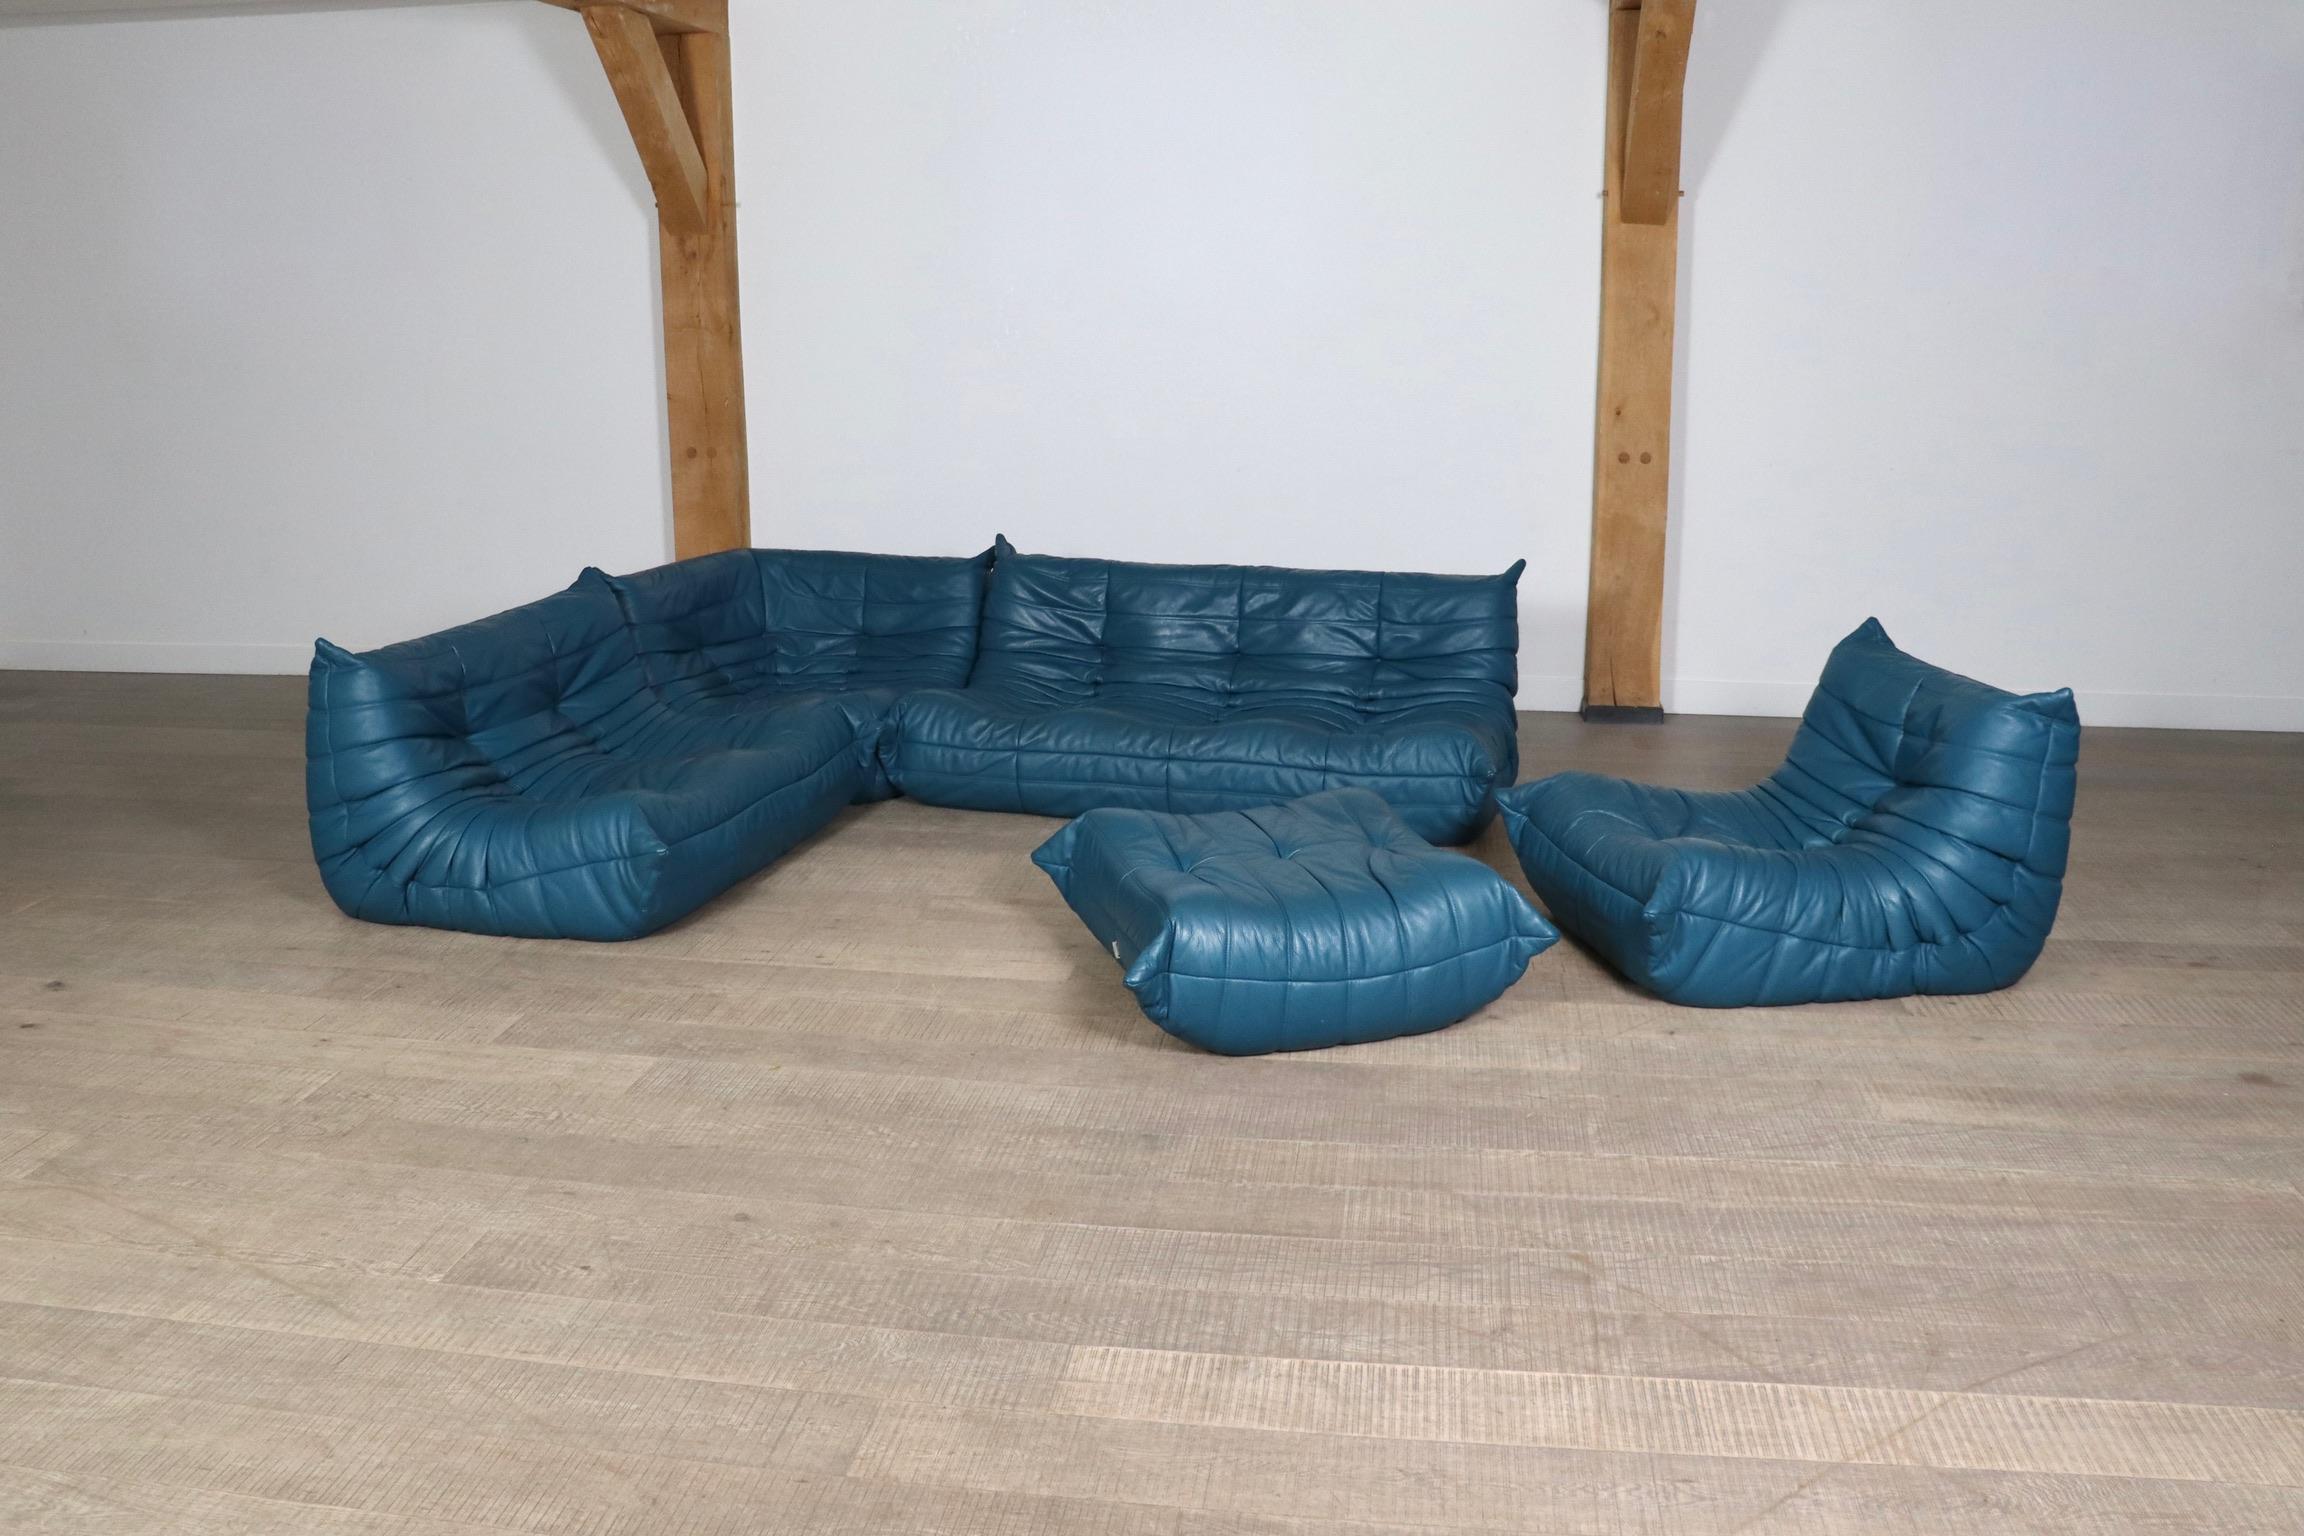 Late 20th Century Original Ligne Roset Togo Sofa Set In Blue Leather By Michel Ducaroy, 1970s For Sale